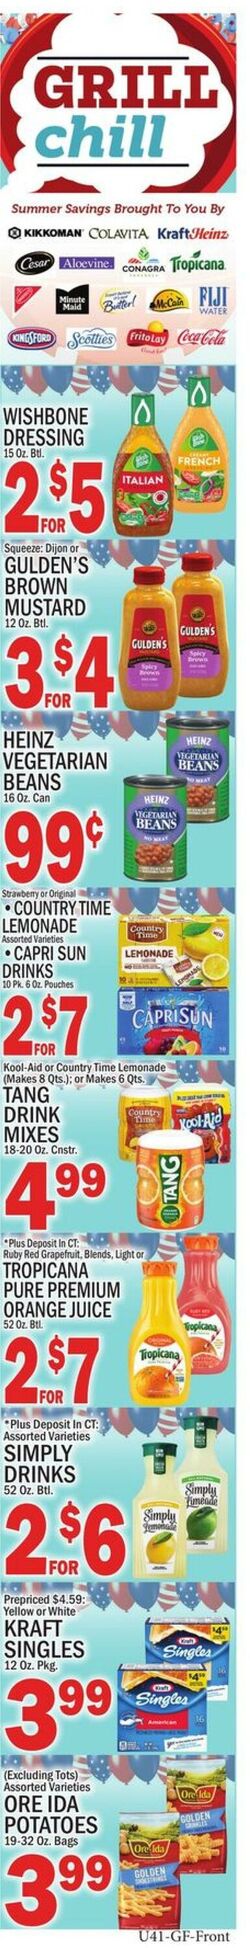 Weekly ad CTown 09/16/2022 - 09/22/2022